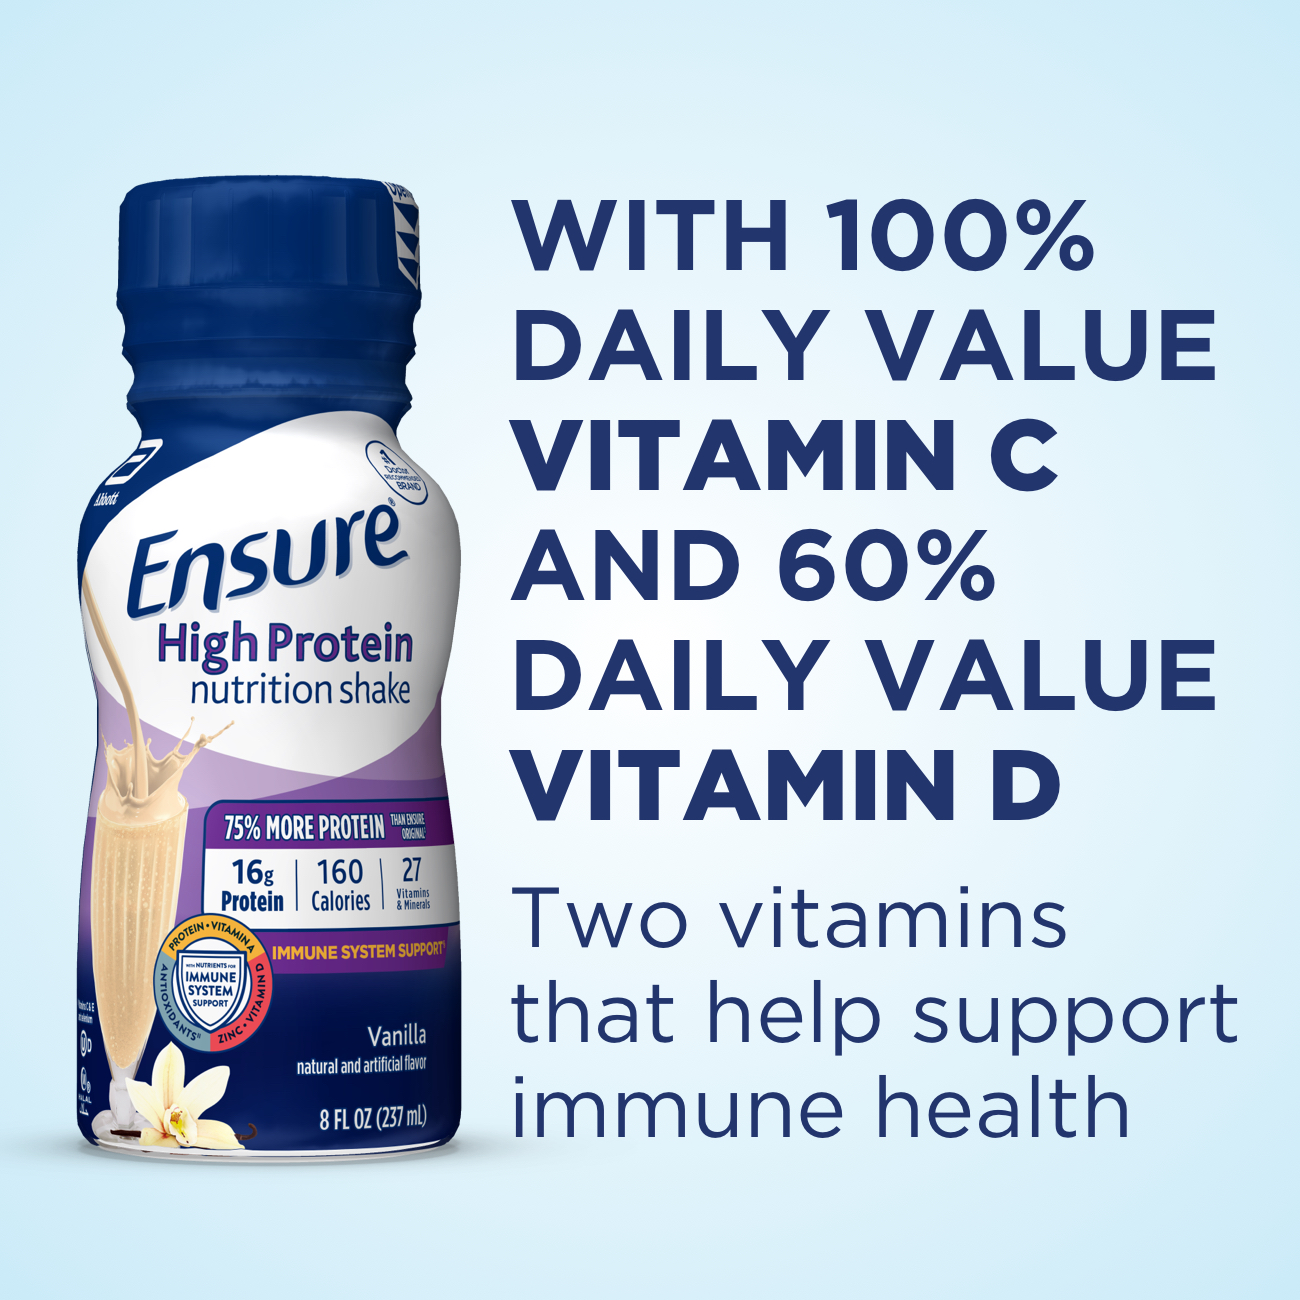 Ensure High Protein Nutrition Shake, Vanilla, 8 fl oz, 12 Count - image 4 of 14